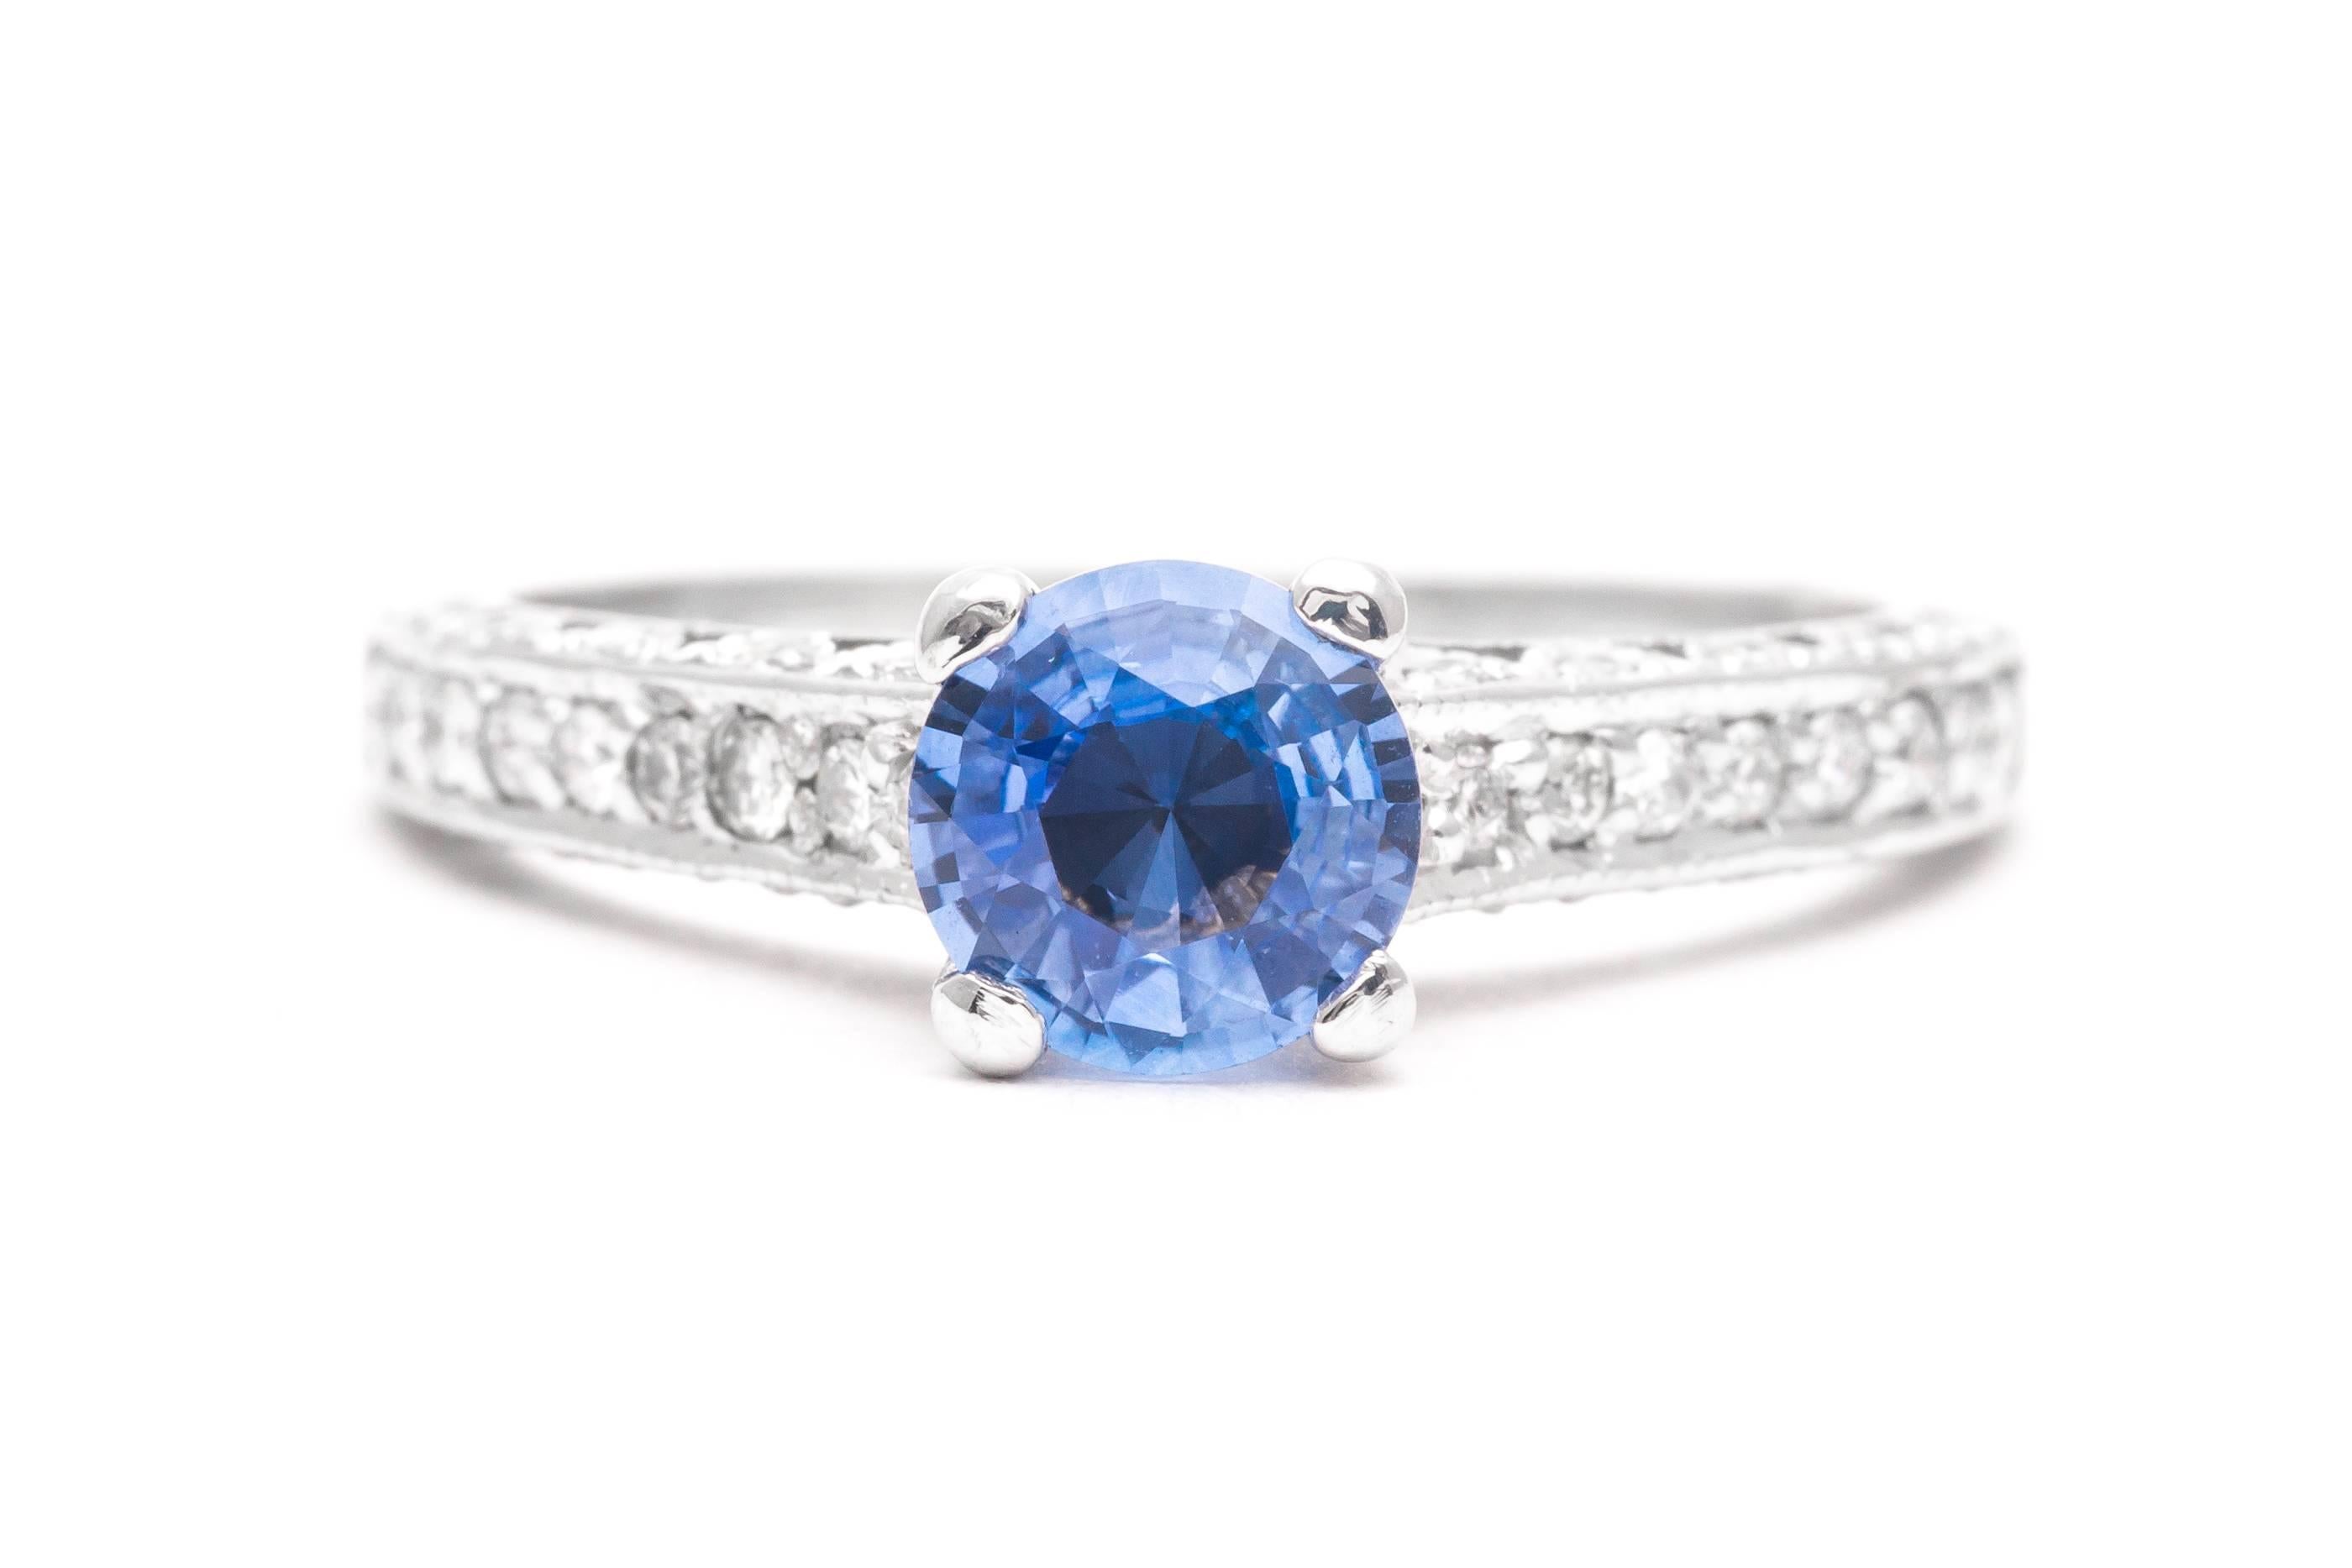 A sparkling sapphire and diamond engagement ring in 14 karat white gold. Center by a top quality natural Ceylon sapphire this ring features a total of forty four accenting diamonds set throughout the mounting.

Grading as superb VS clarity and